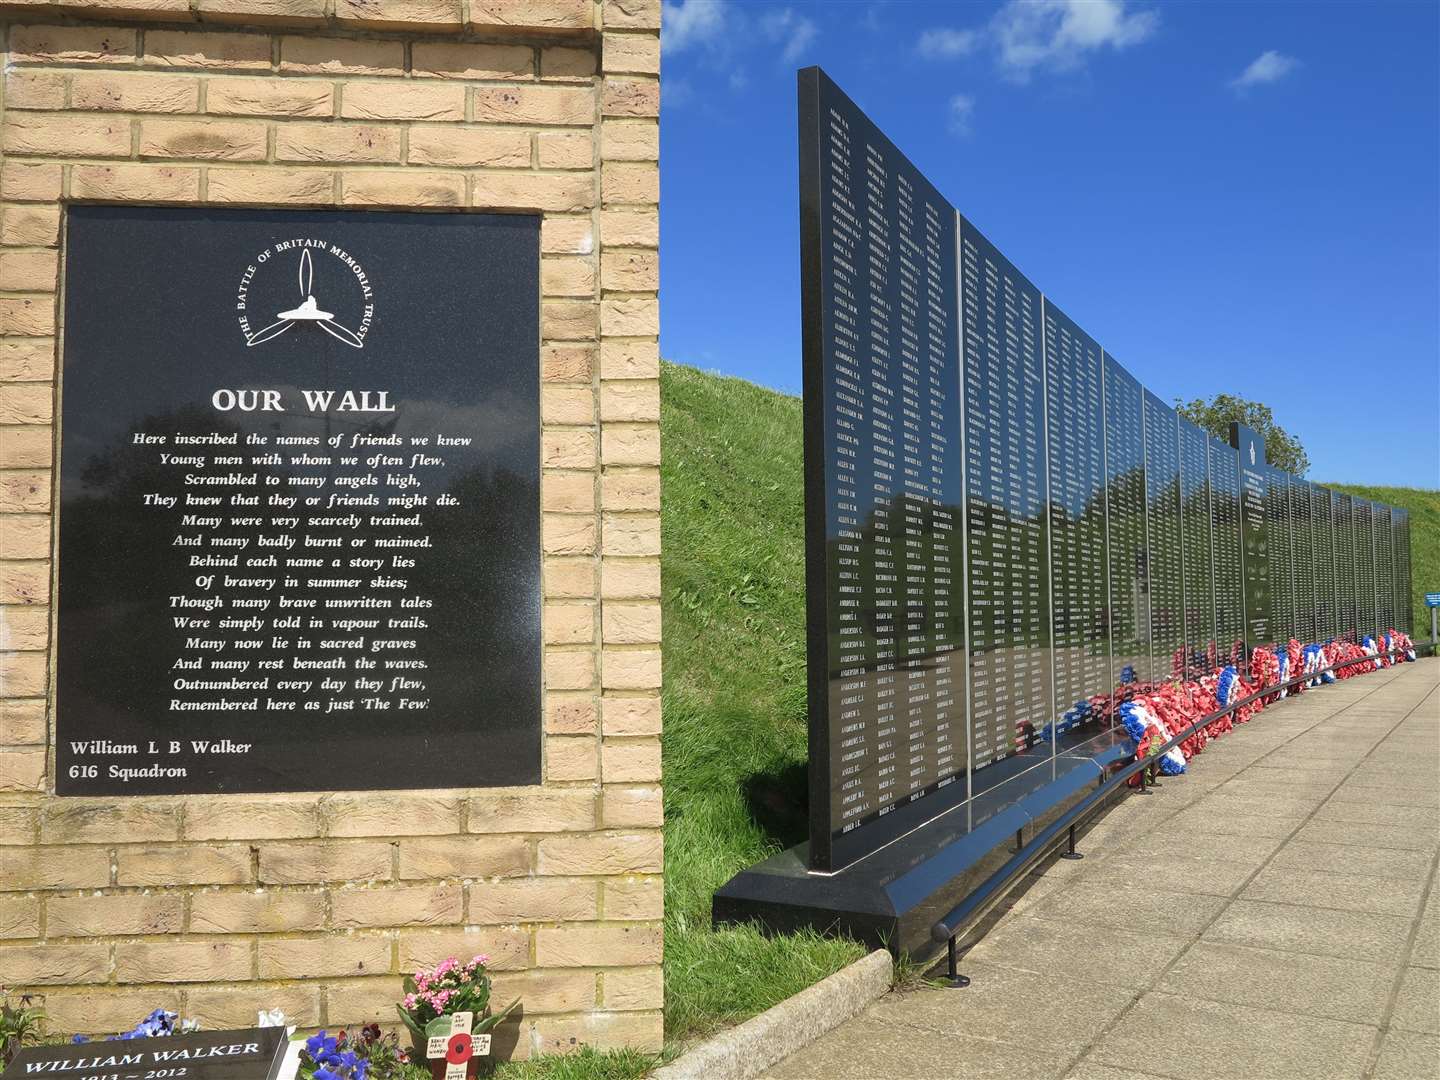 The Christopher Foxley-Norris Memorial Wall at the memorial